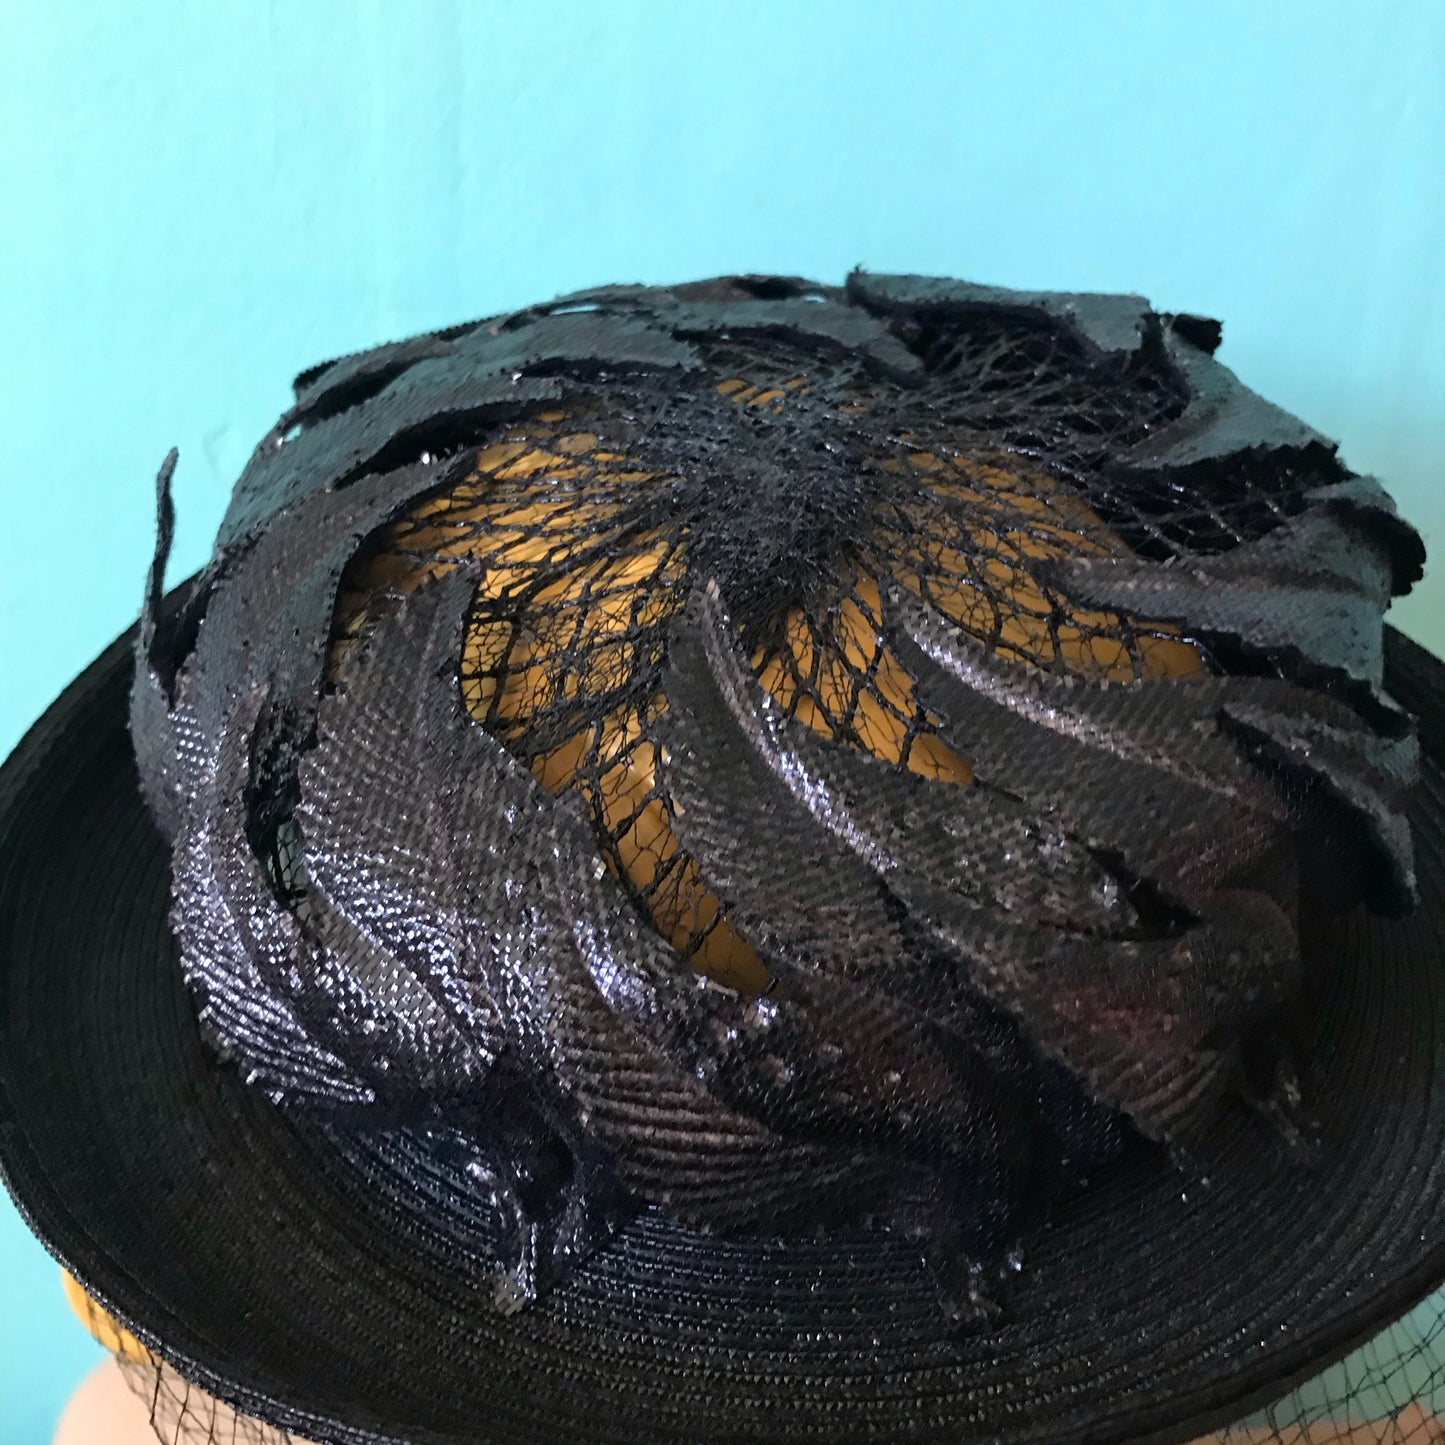 Black Narrow Brimmed Boater Style Hat with Flame Shaped Leaves on Open Top circa 1960s